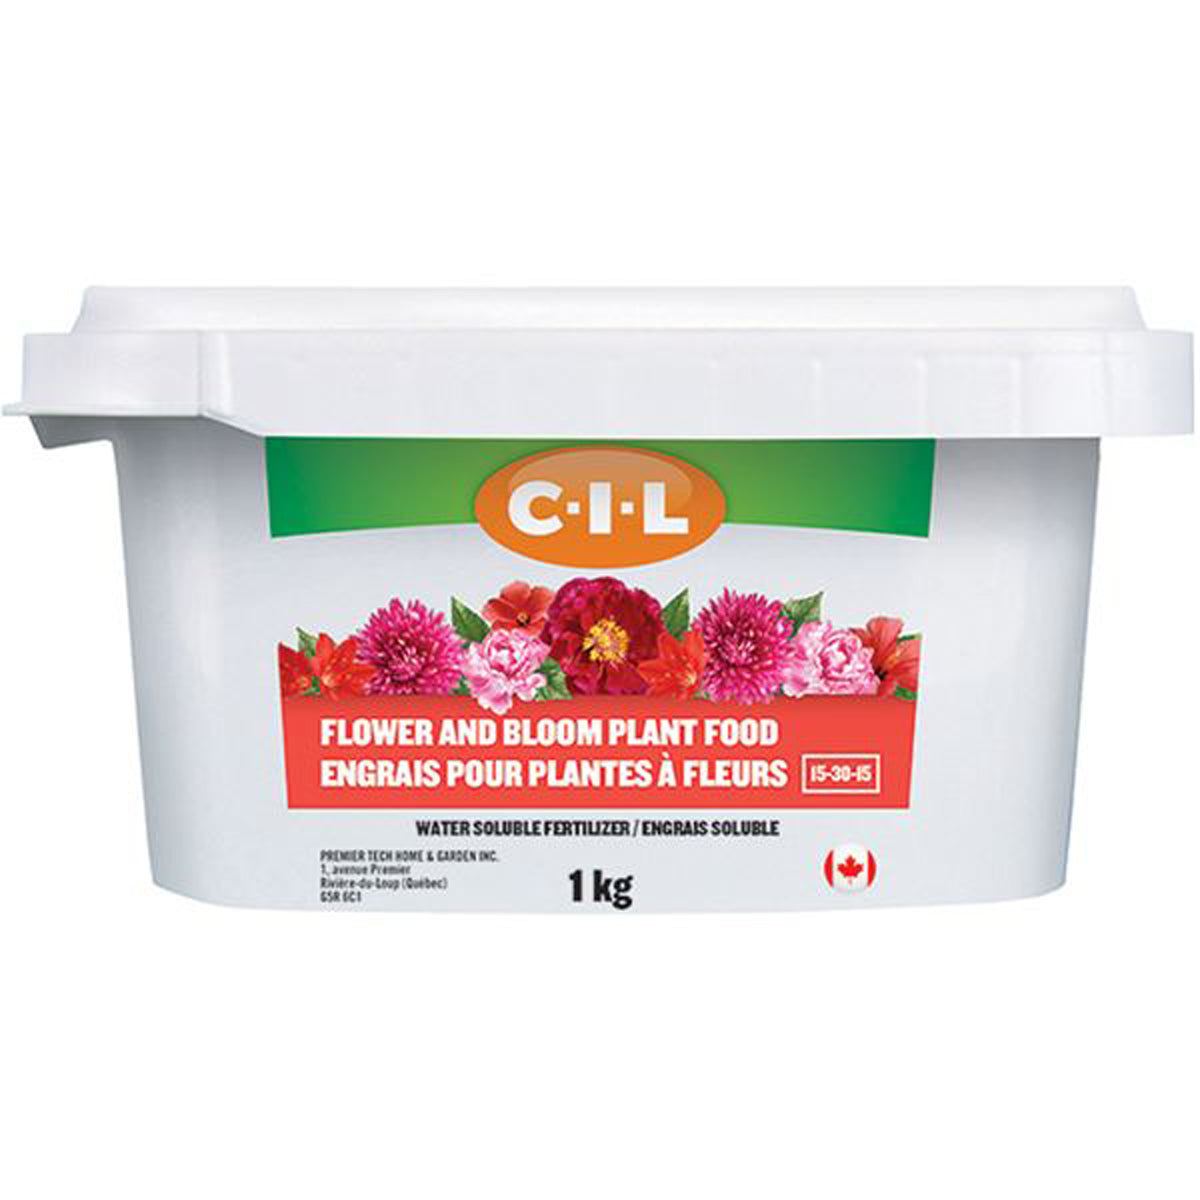 C-I-L Flowers and Bloom Plant Food 15-30-15 1 KG